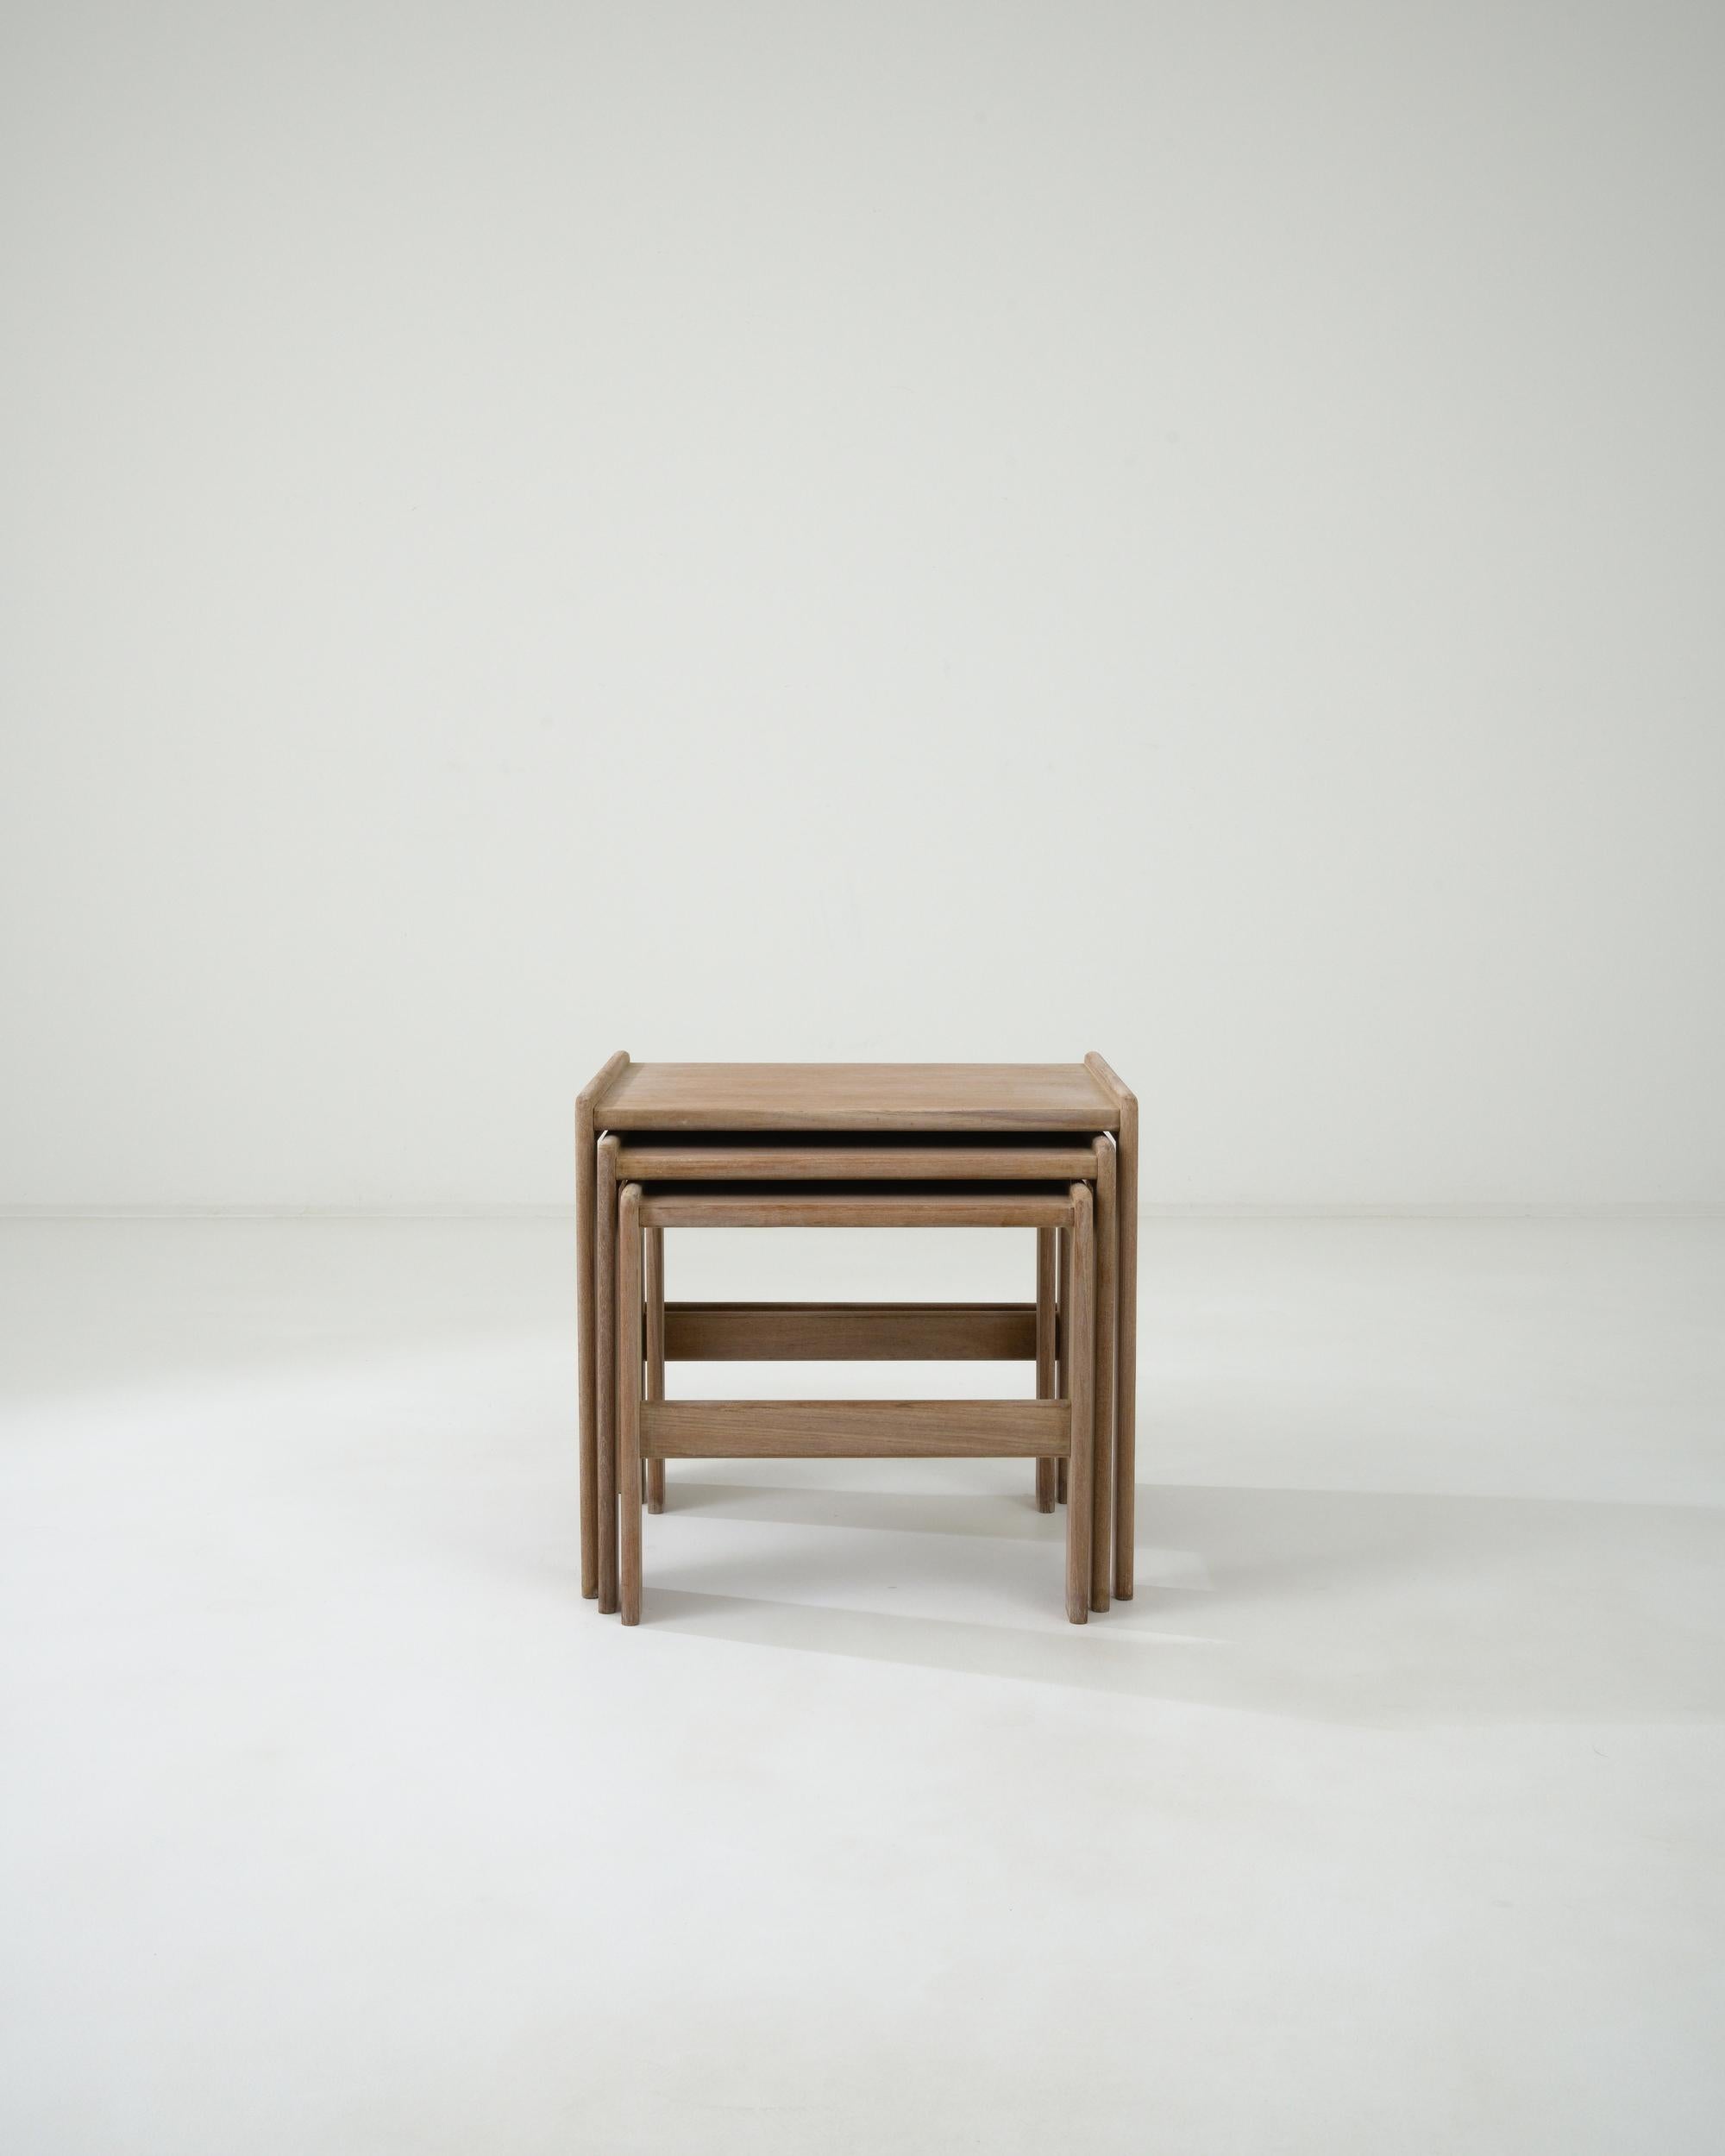 Built in Scandinavia during the 20th century, this set of nesting tables flaunts impeccable symmetry expressed through the gentle interplay of sleek outlines of their geometric bases and smooth tabletops. The use of bleached teak, often associated